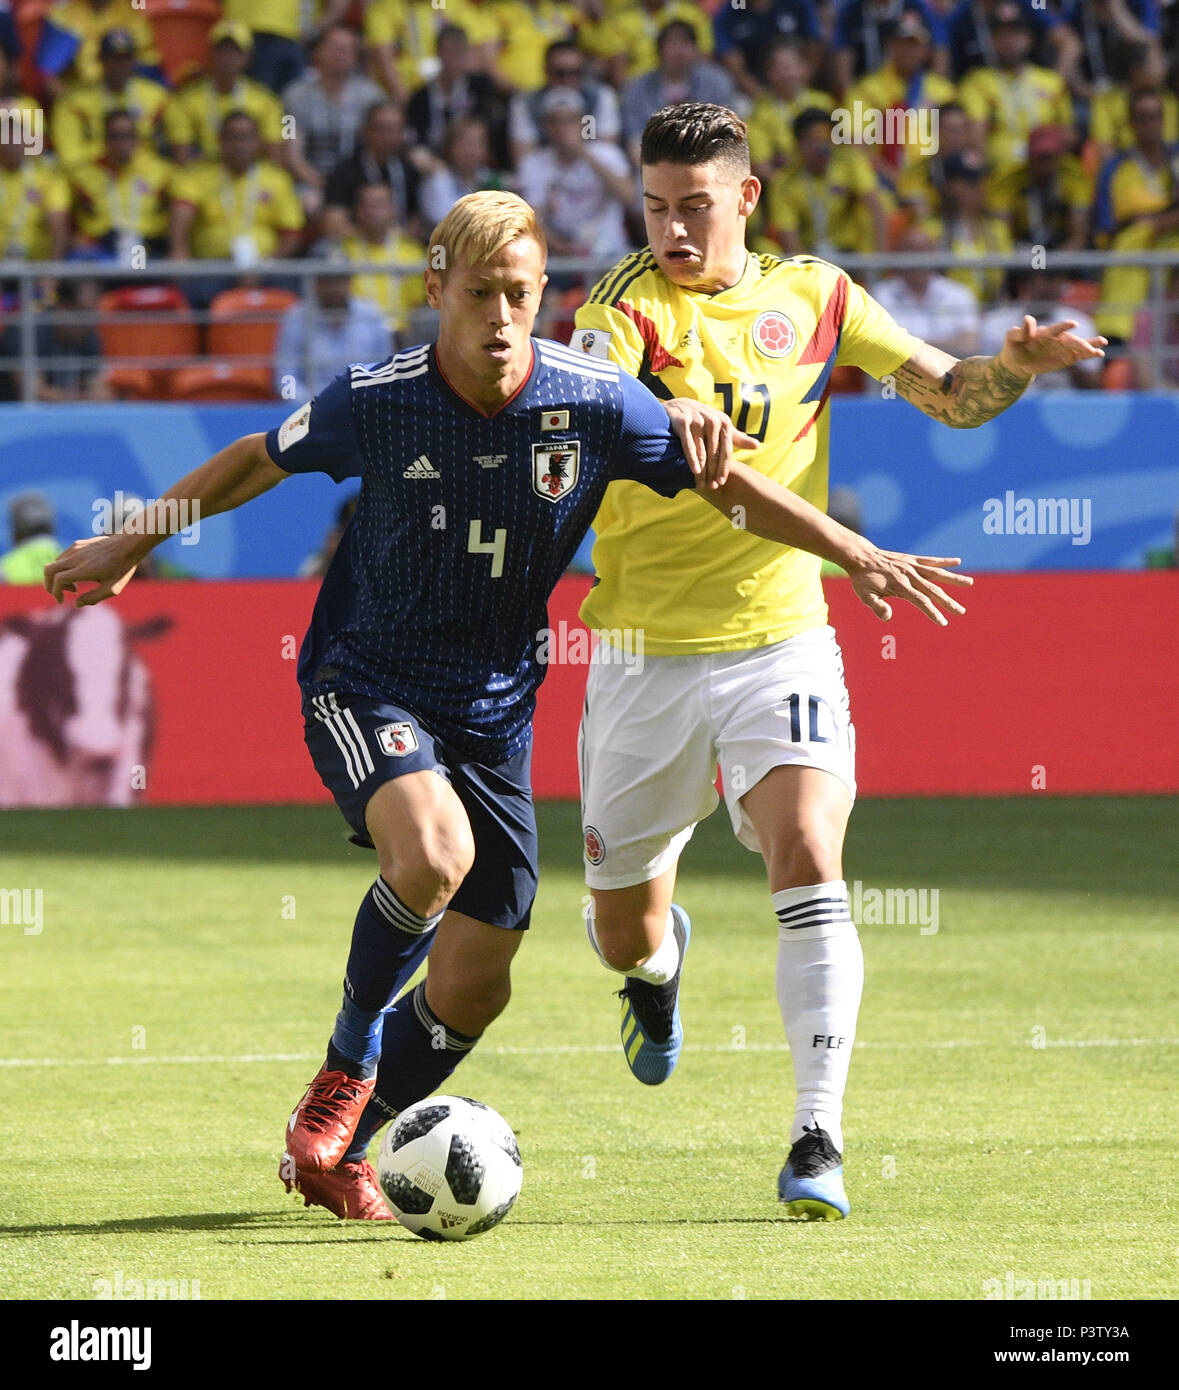 Saransk, Russia. 19th June, 2018. James Rodriguez (R) of Colombia vies with Keisuke Honda of Japan during a Group H match between Colombia and Japan at the 2018 FIFA World Cup in Saransk, Russia, June 19, 2018. Credit: Lui Siu Wai/Xinhua/Alamy Live News Stock Photo